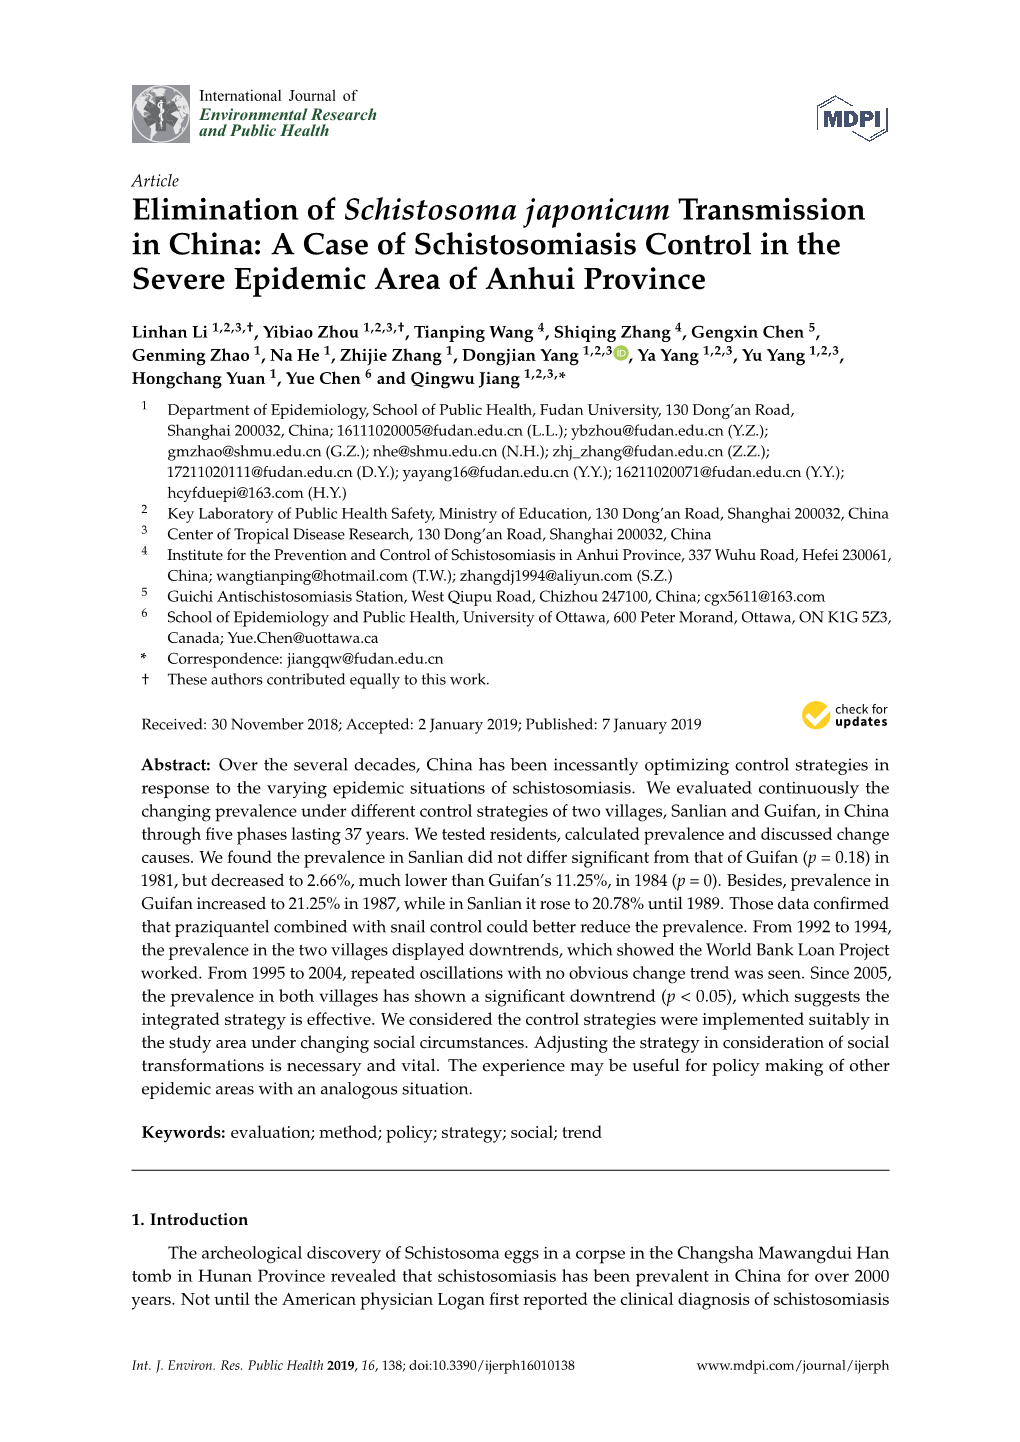 Elimination of Schistosoma Japonicum Transmission in China: a Case of Schistosomiasis Control in the Severe Epidemic Area of Anhui Province